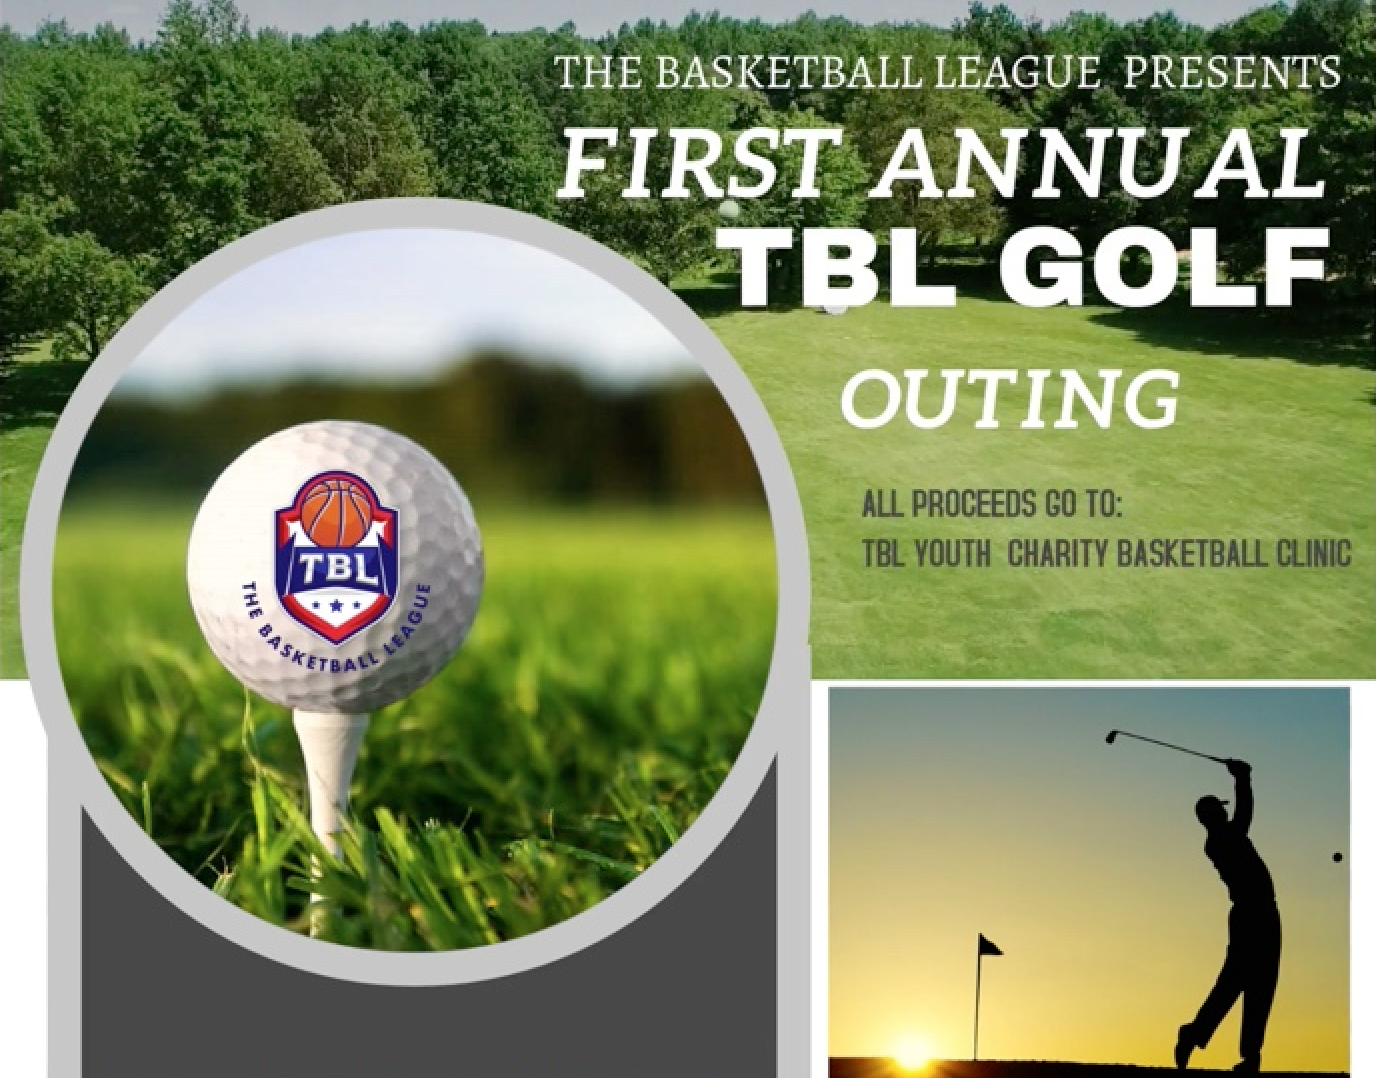 FIRST ANNUAL TBL GOLF OUTING